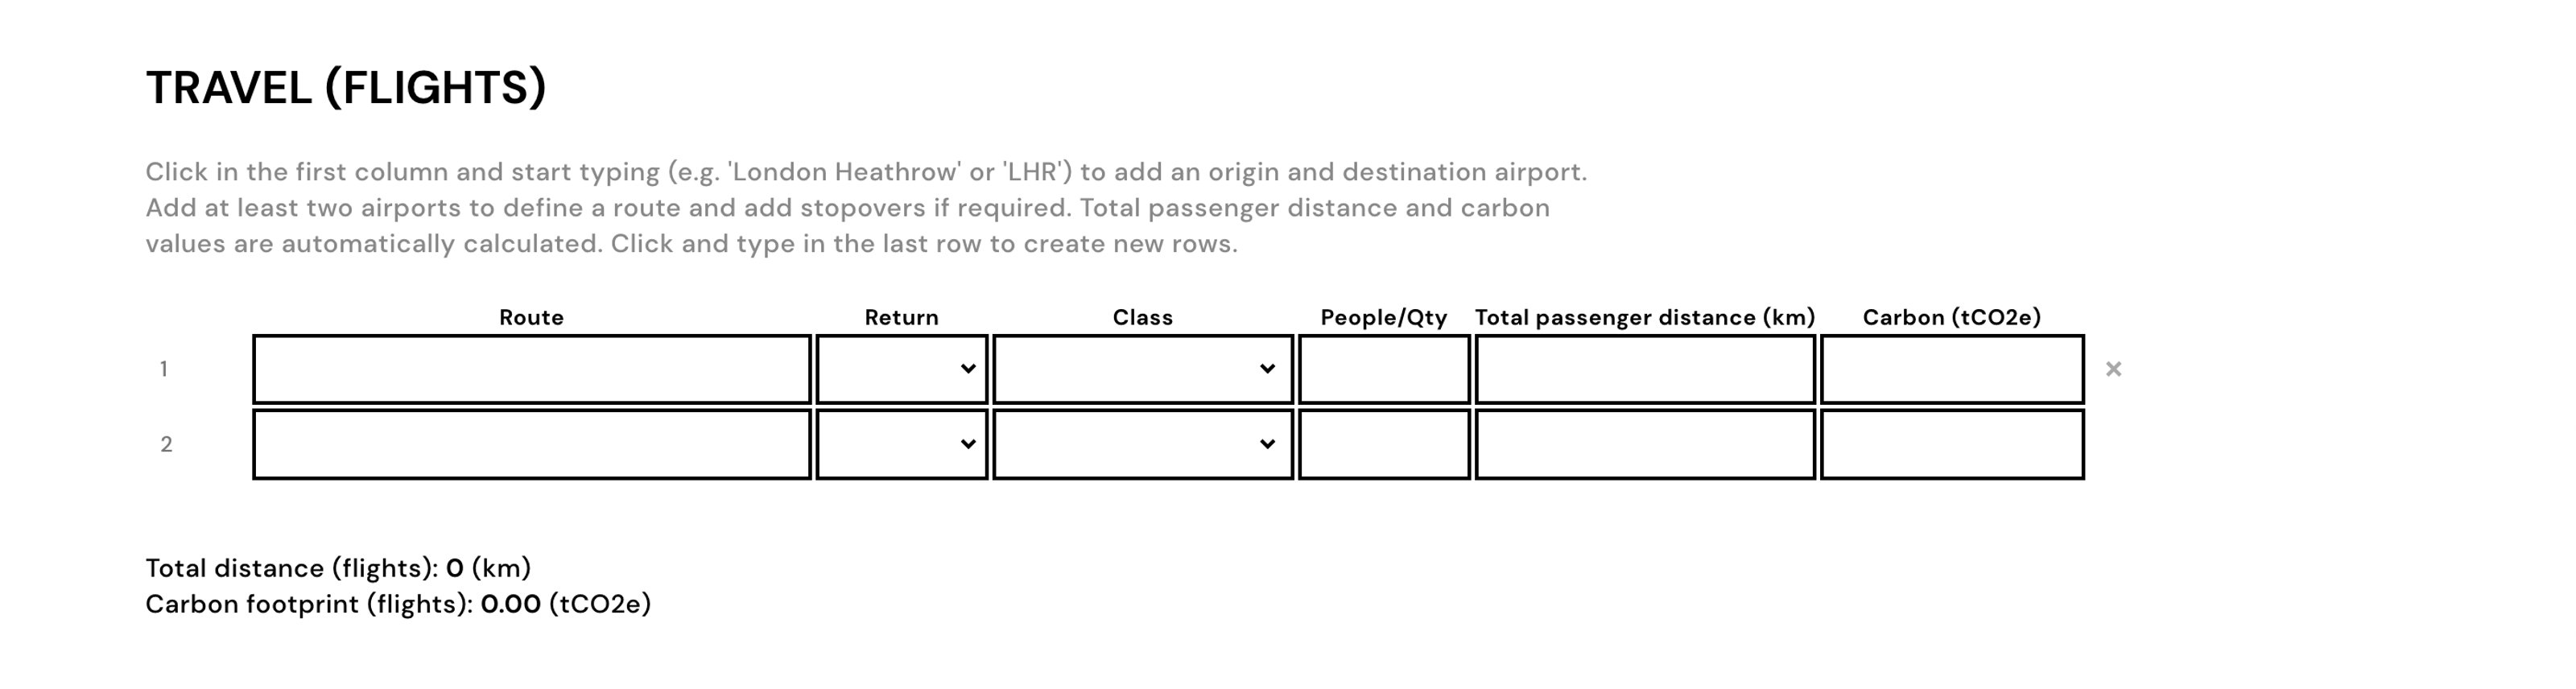 Screenshot of the Gallery Climate Coalition's Carbon Calculator for air travel